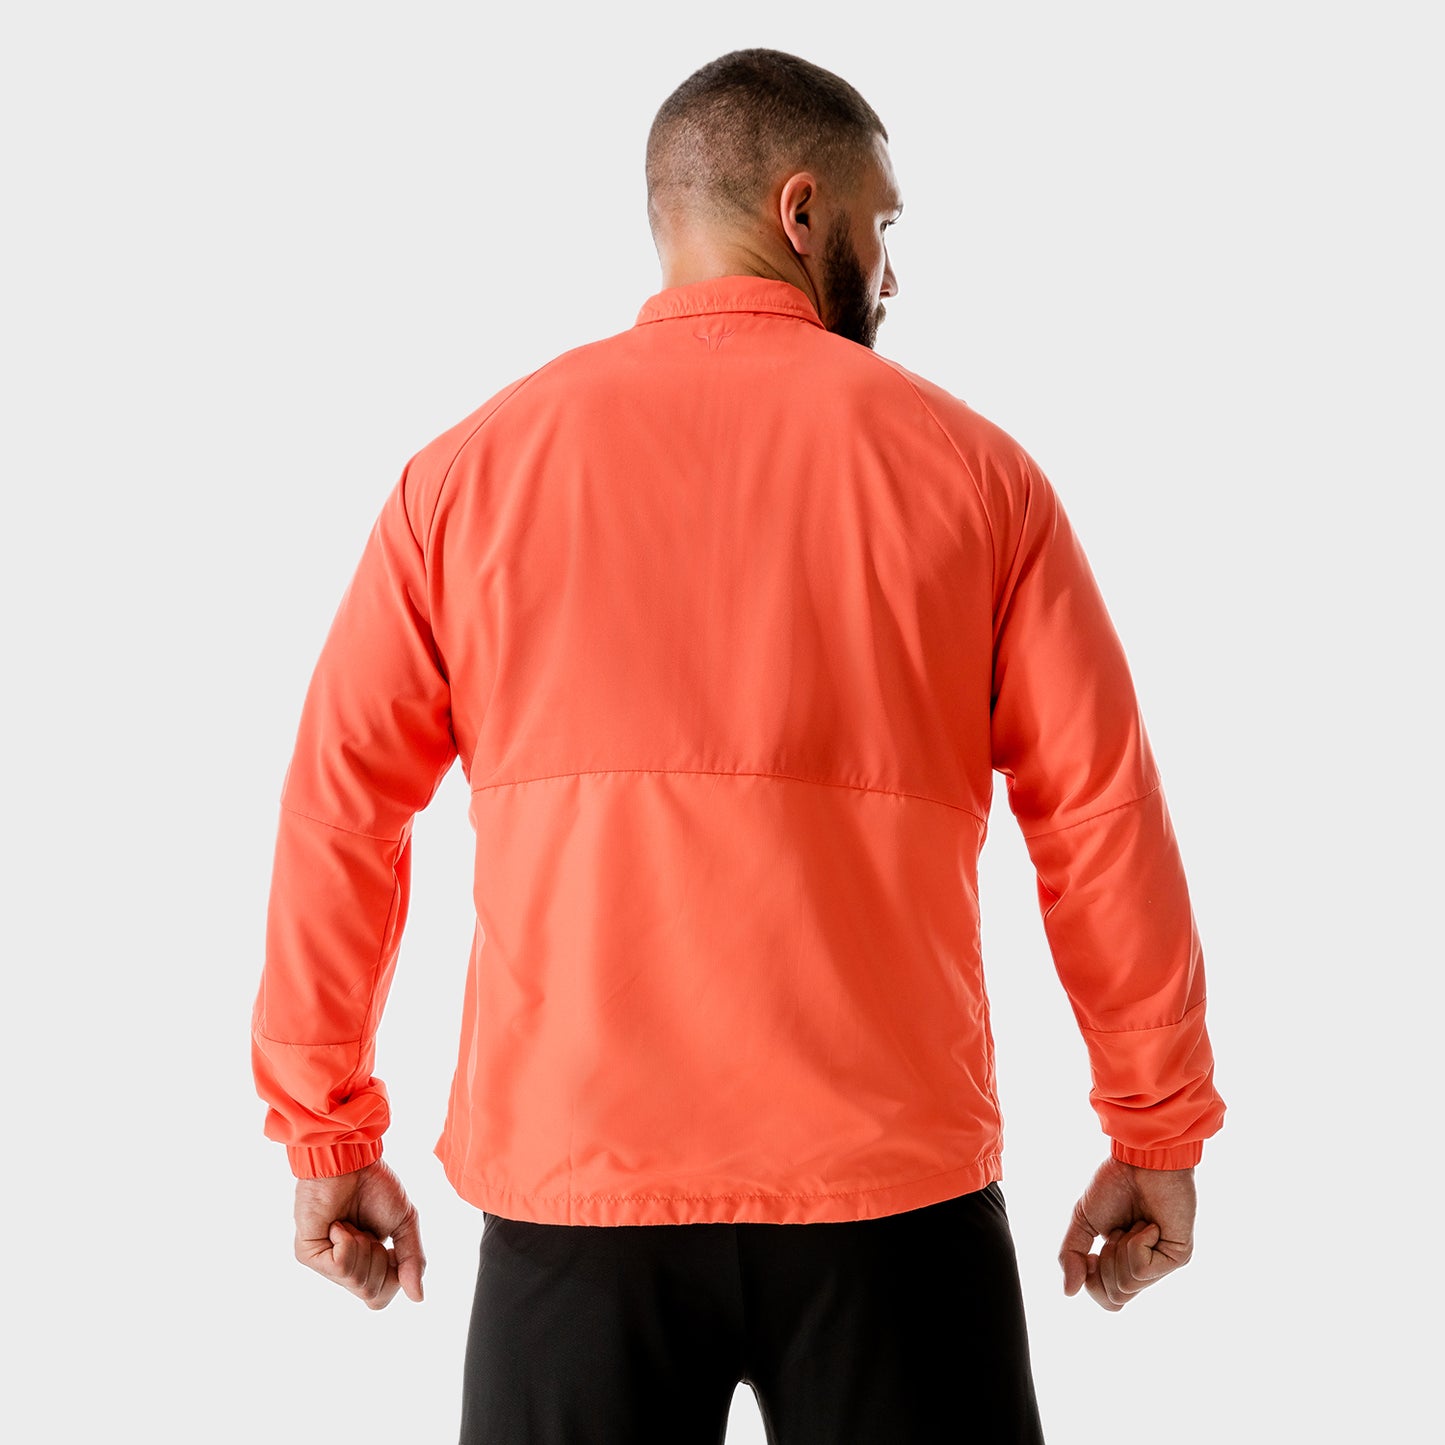 squatwolf-gym-wear-lab-360-performance-windbreaker-red-workout-hoodies-for-men